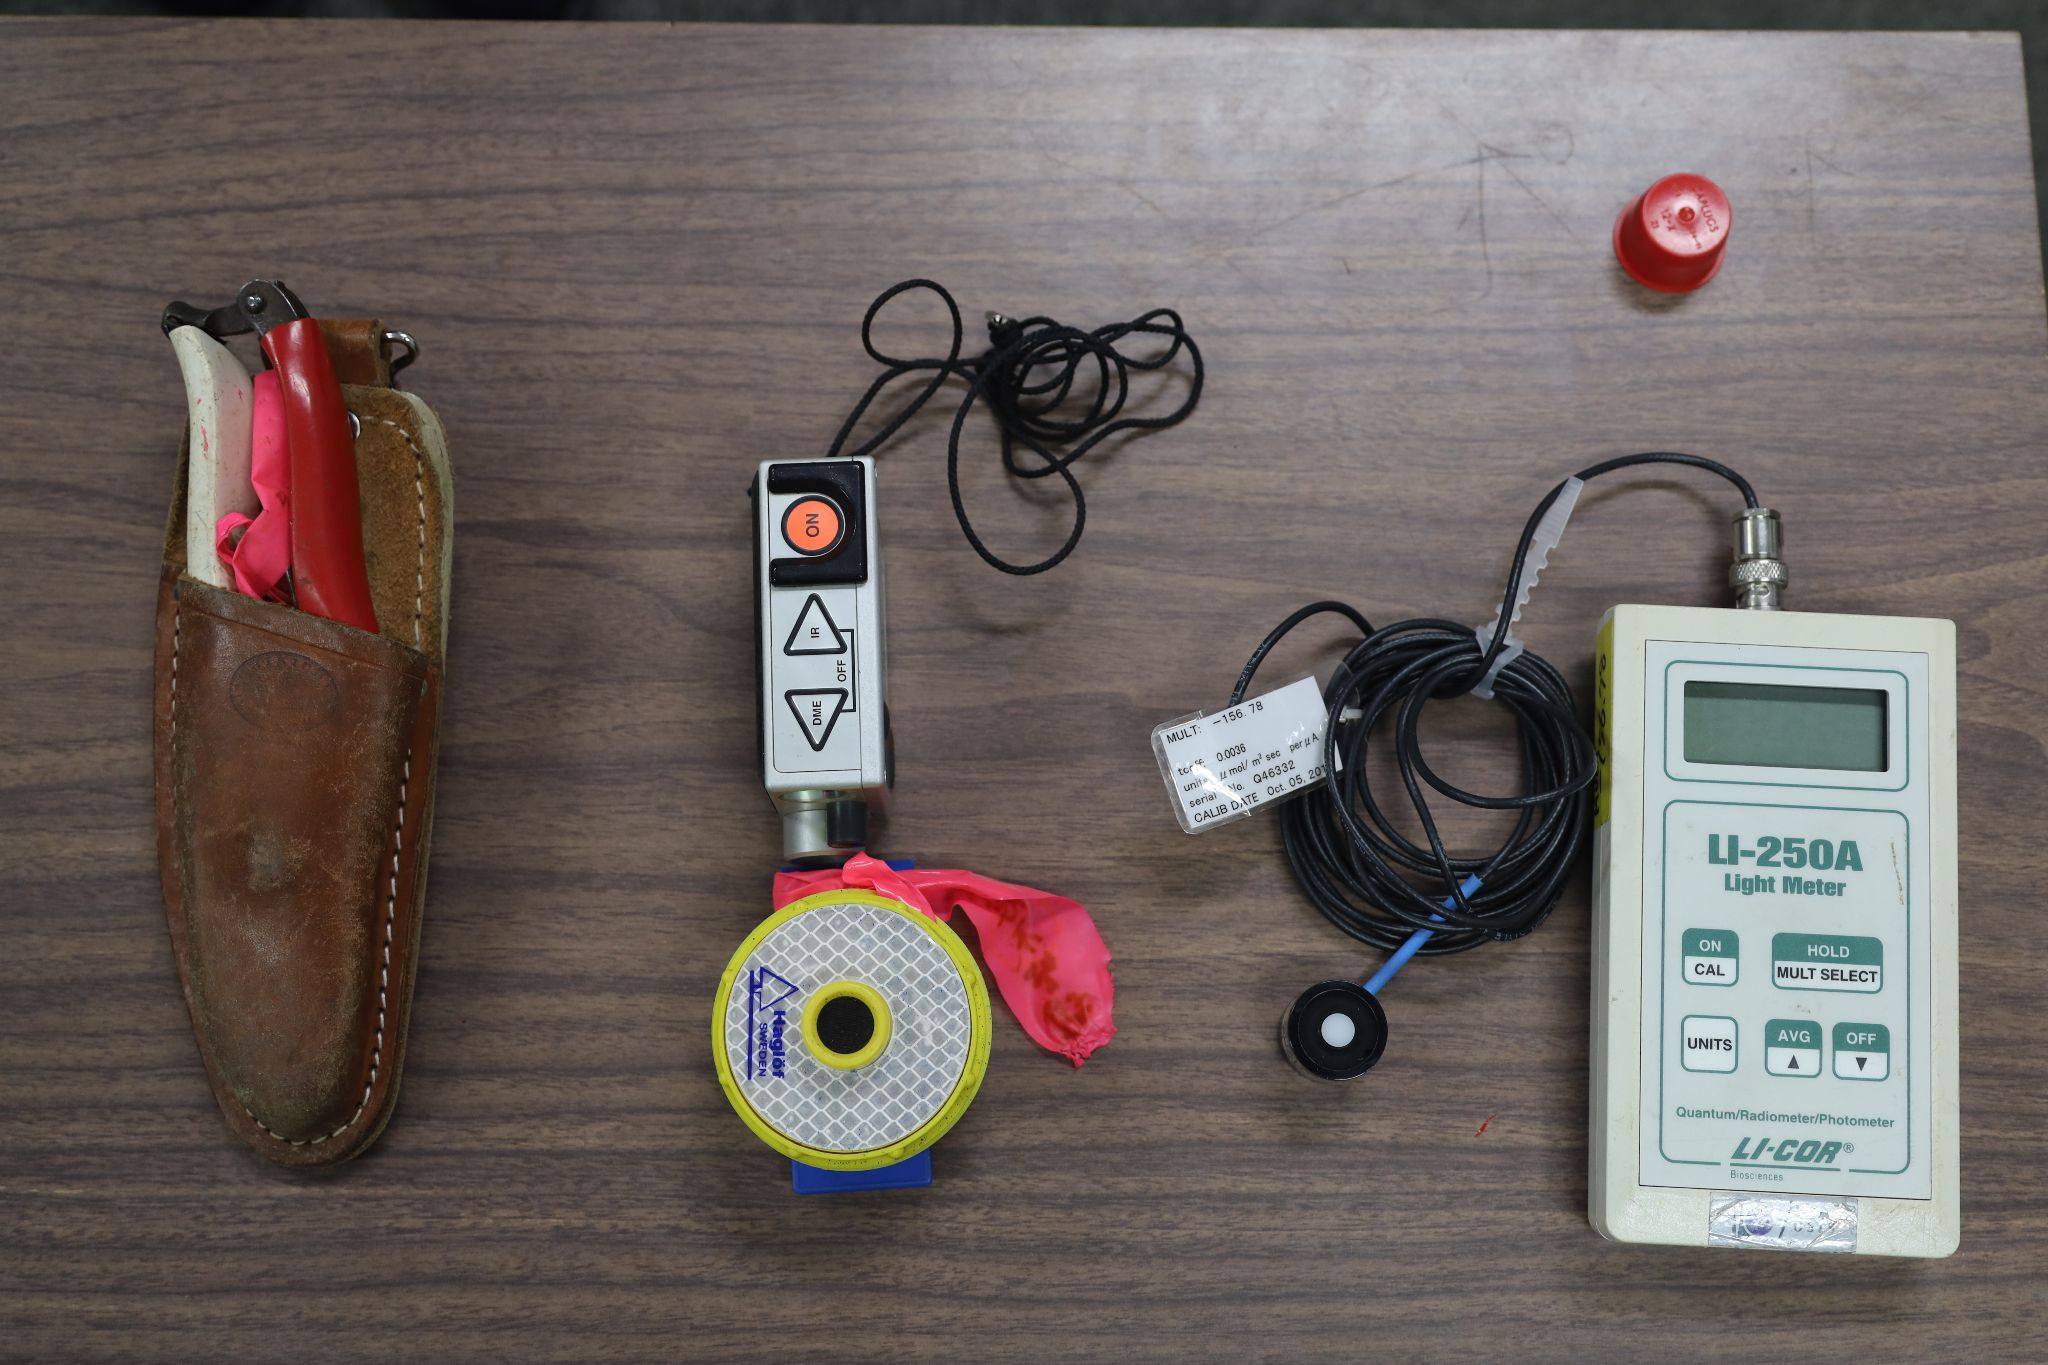 Basic tools for the field survey. From left to right: pruning shears, a tool for measuring tree heights, and a light meter.